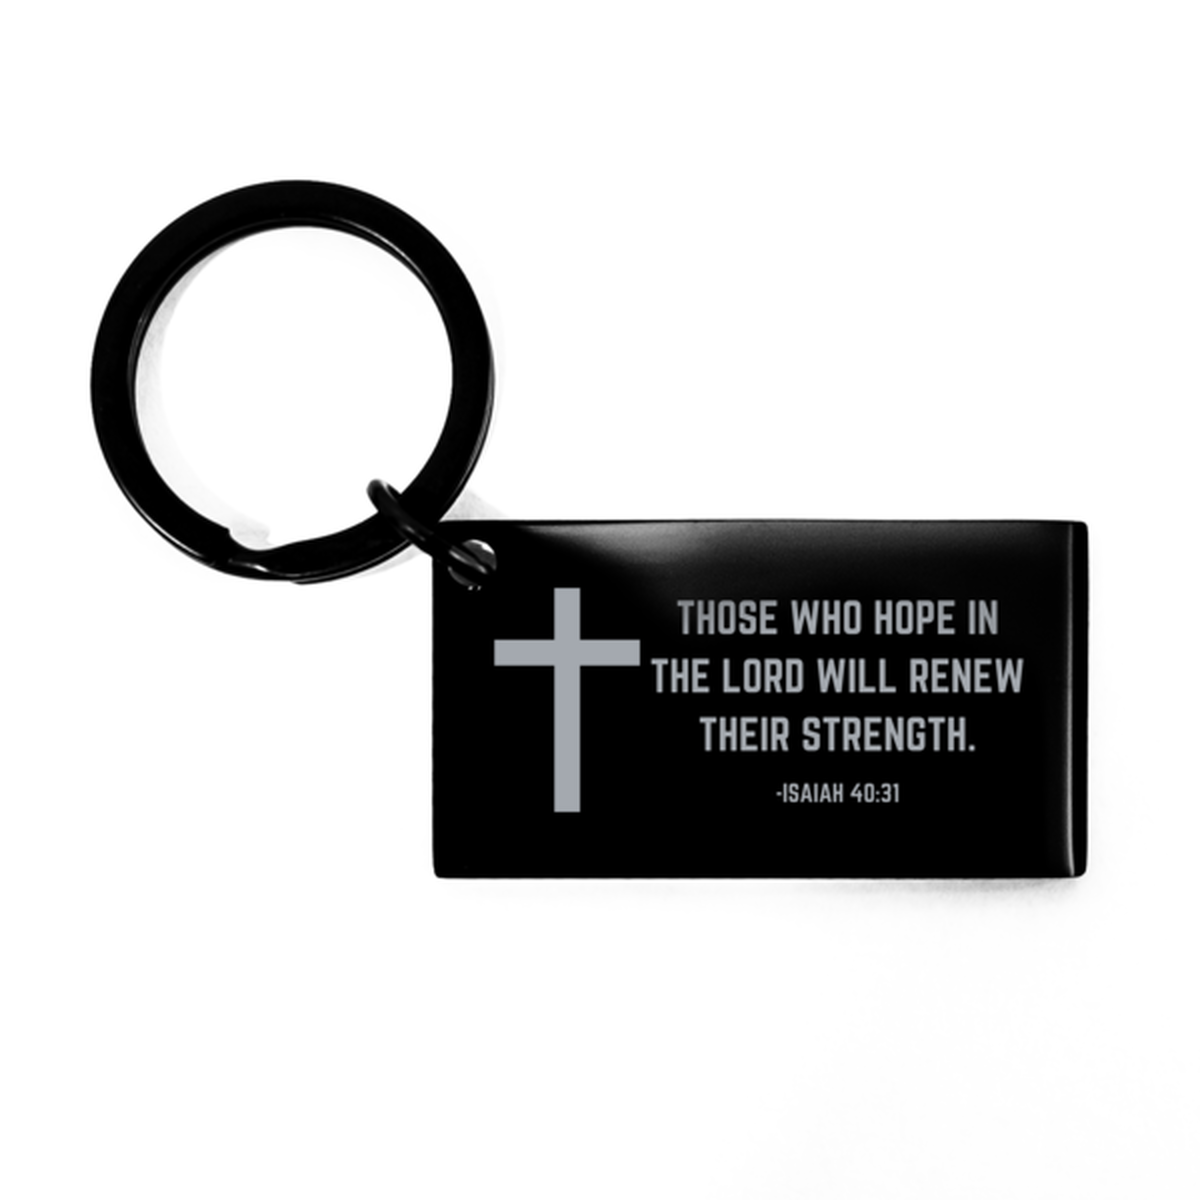 Baptism Gifts For Teenage Boys Girls, Christian Bible Verse Black Keychain, Those who hope in the Lord, Confirmation Gifts, Bible Verse Keyring for Son, Godson, Grandson, Nephew